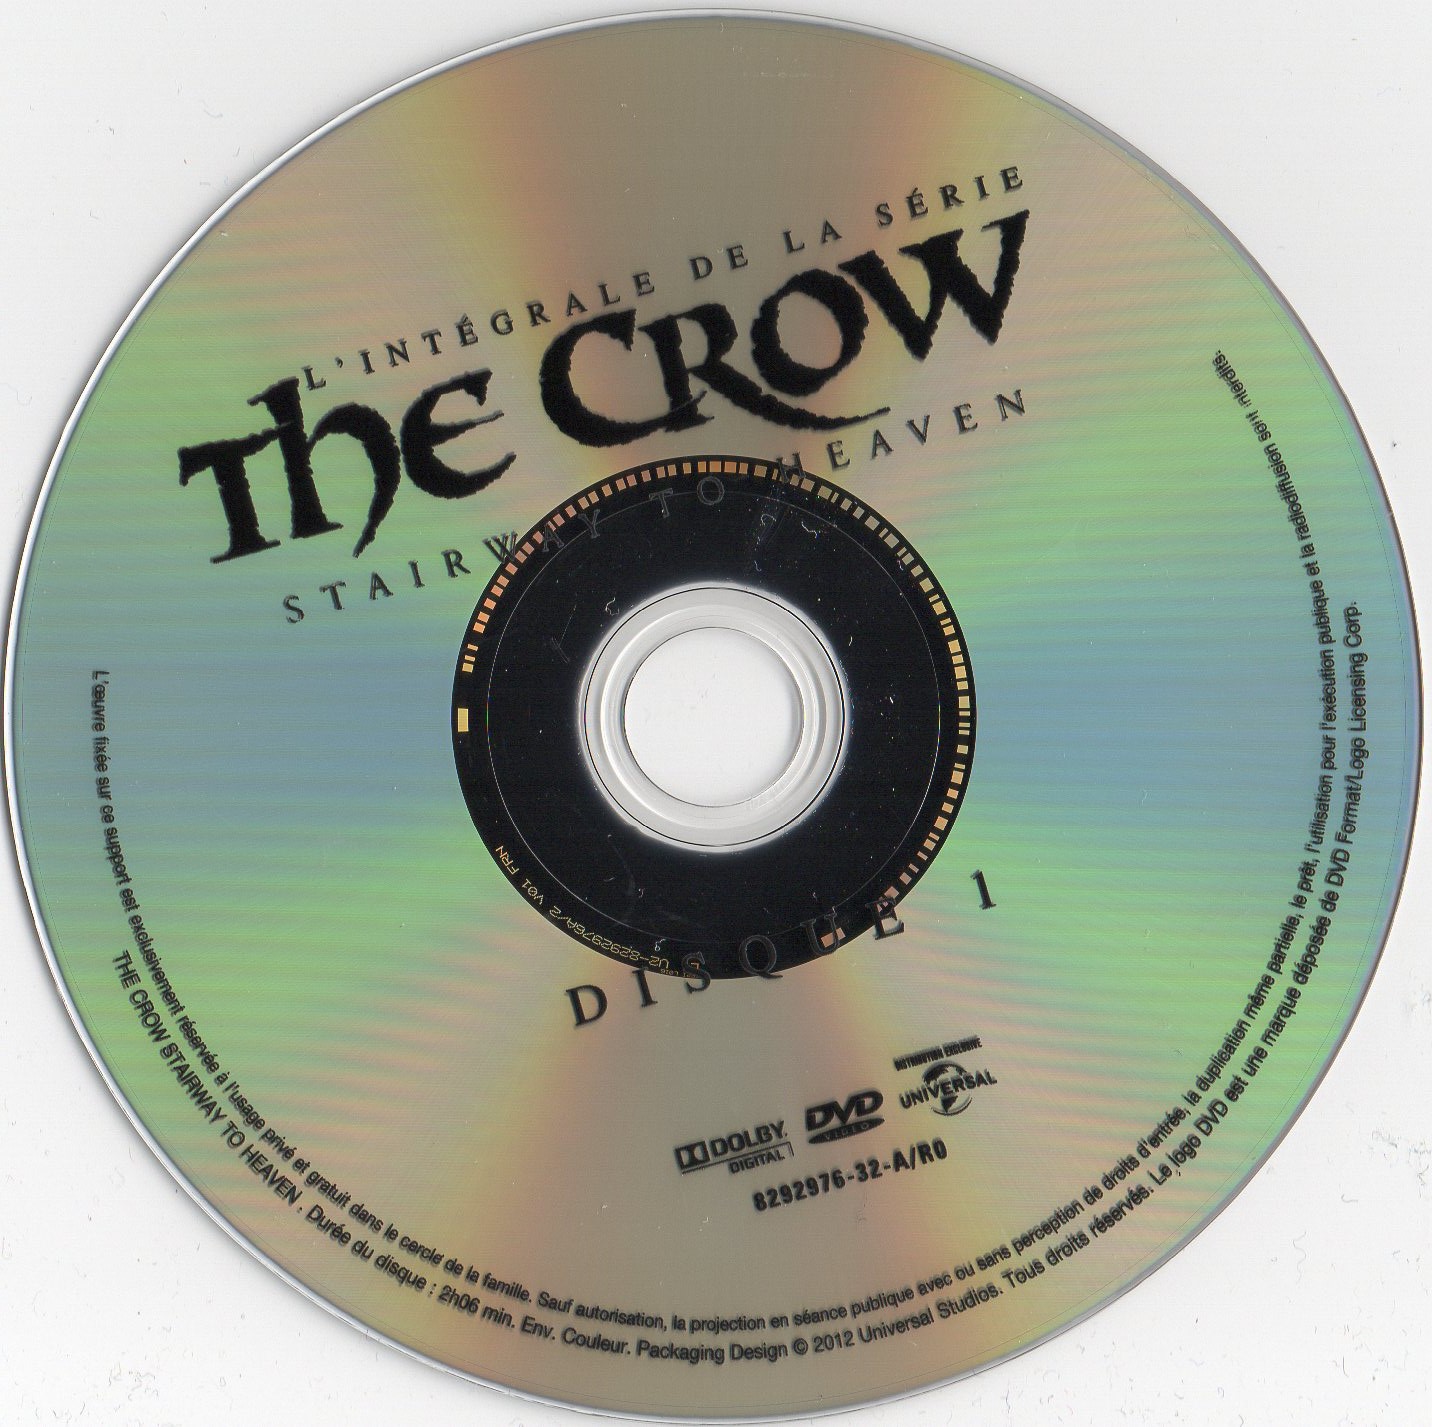 The crow stairway to heaven DISC 1 